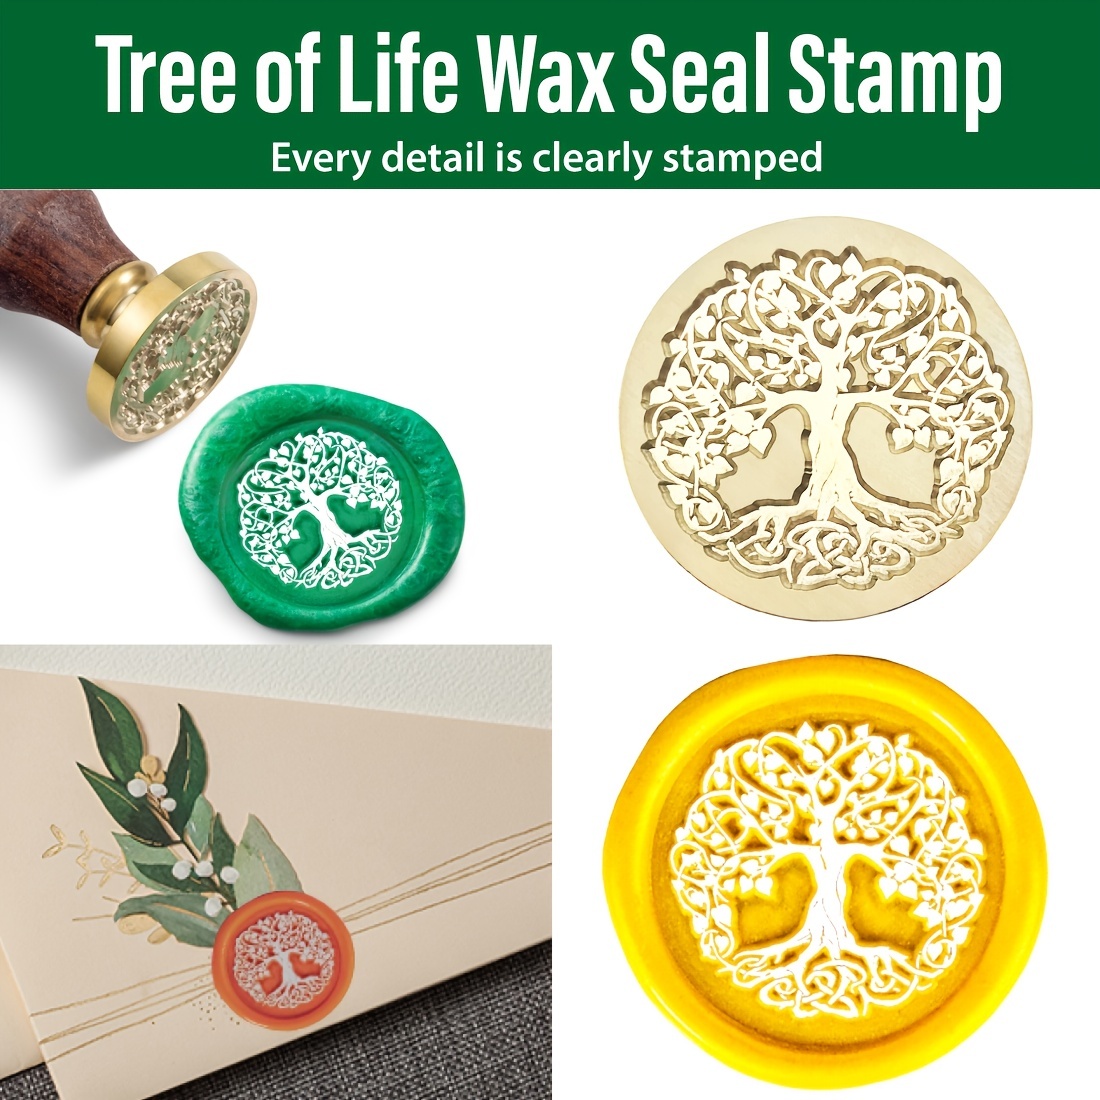 Wholesale SUPERDANT 6 pcs/set 25mm Wax Seal Stamp Kit Happy Birthday Day Wax  Sealing Stamp Brass Head Stamp 2 Wooden Handle for Gifts Envelopes Card  Without Wax 